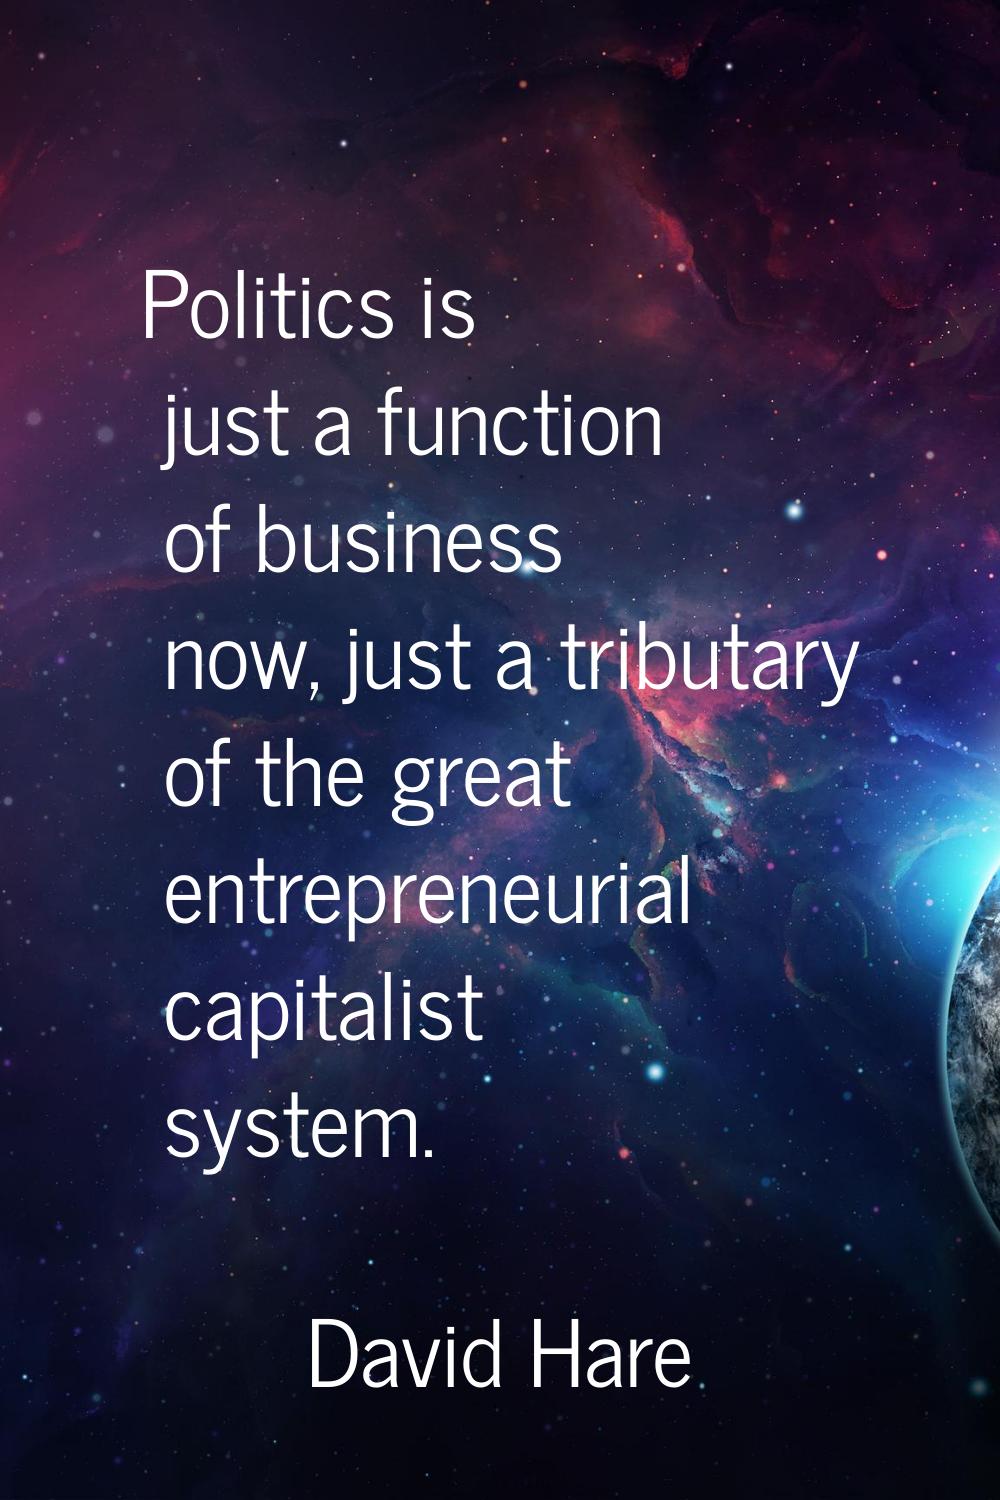 Politics is just a function of business now, just a tributary of the great entrepreneurial capitali